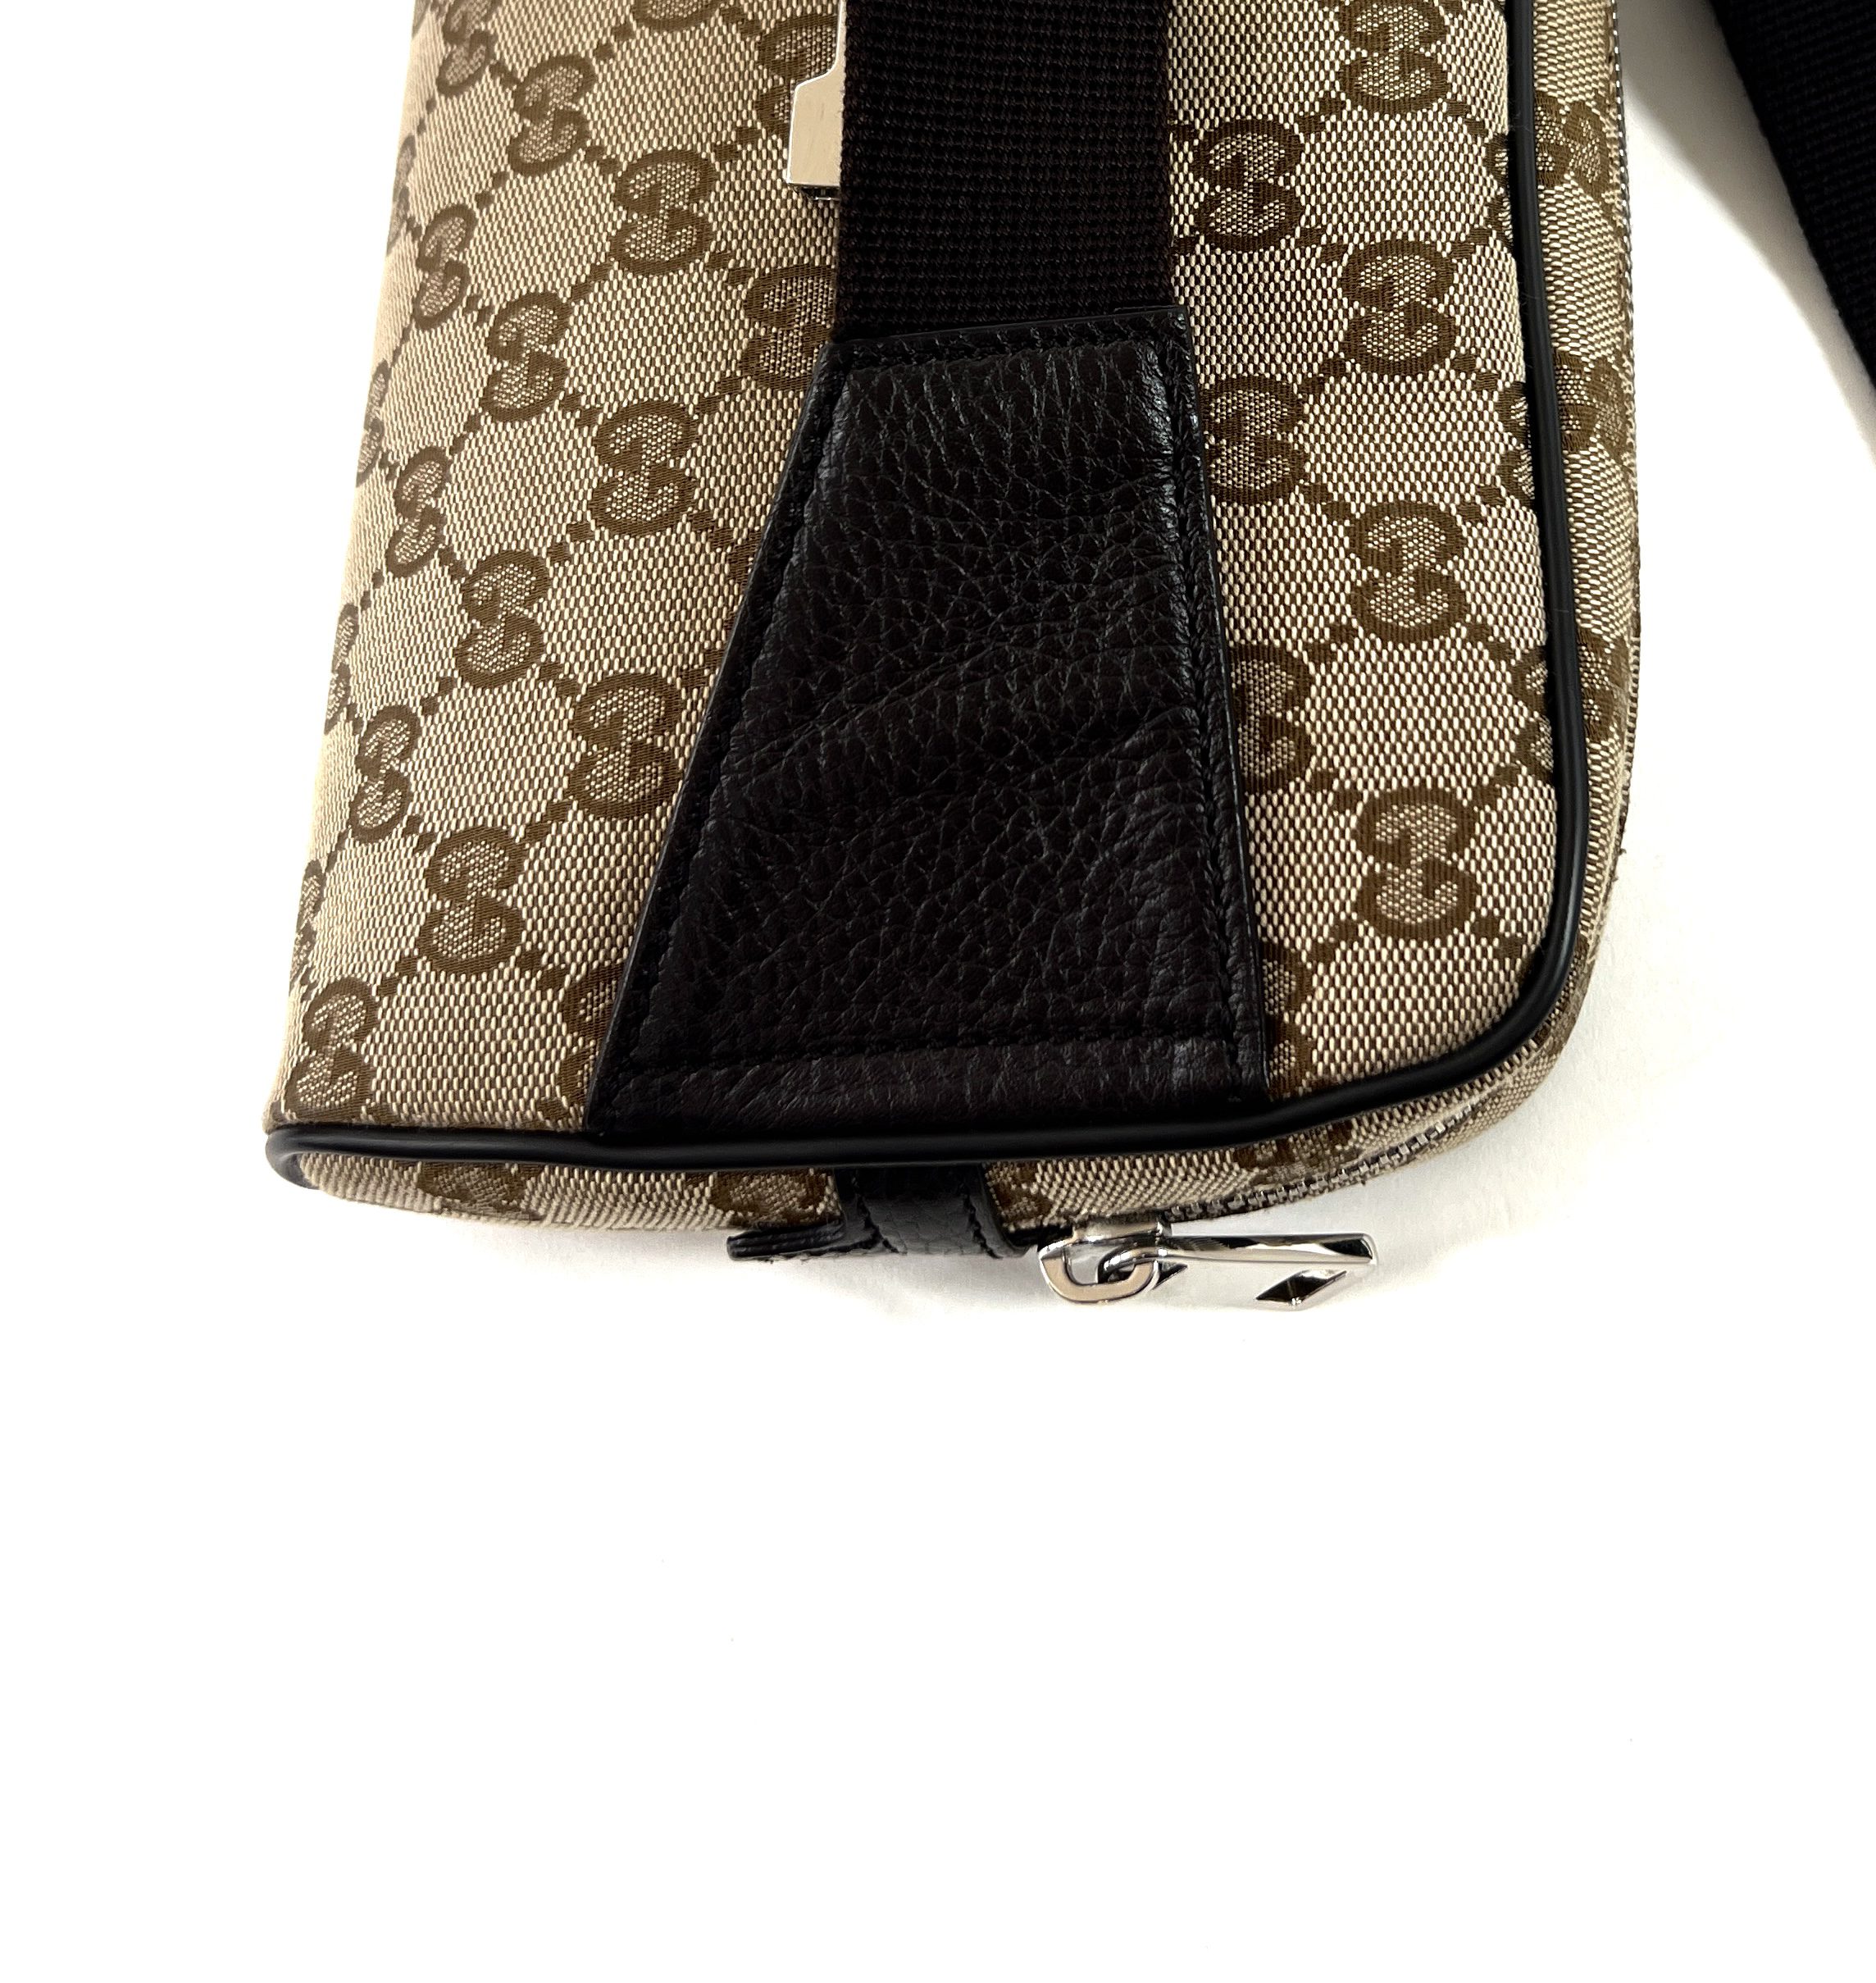 NEW GUCCI GG GUCCISSIMA CANVAS BACKPACK BAG RFID CODE